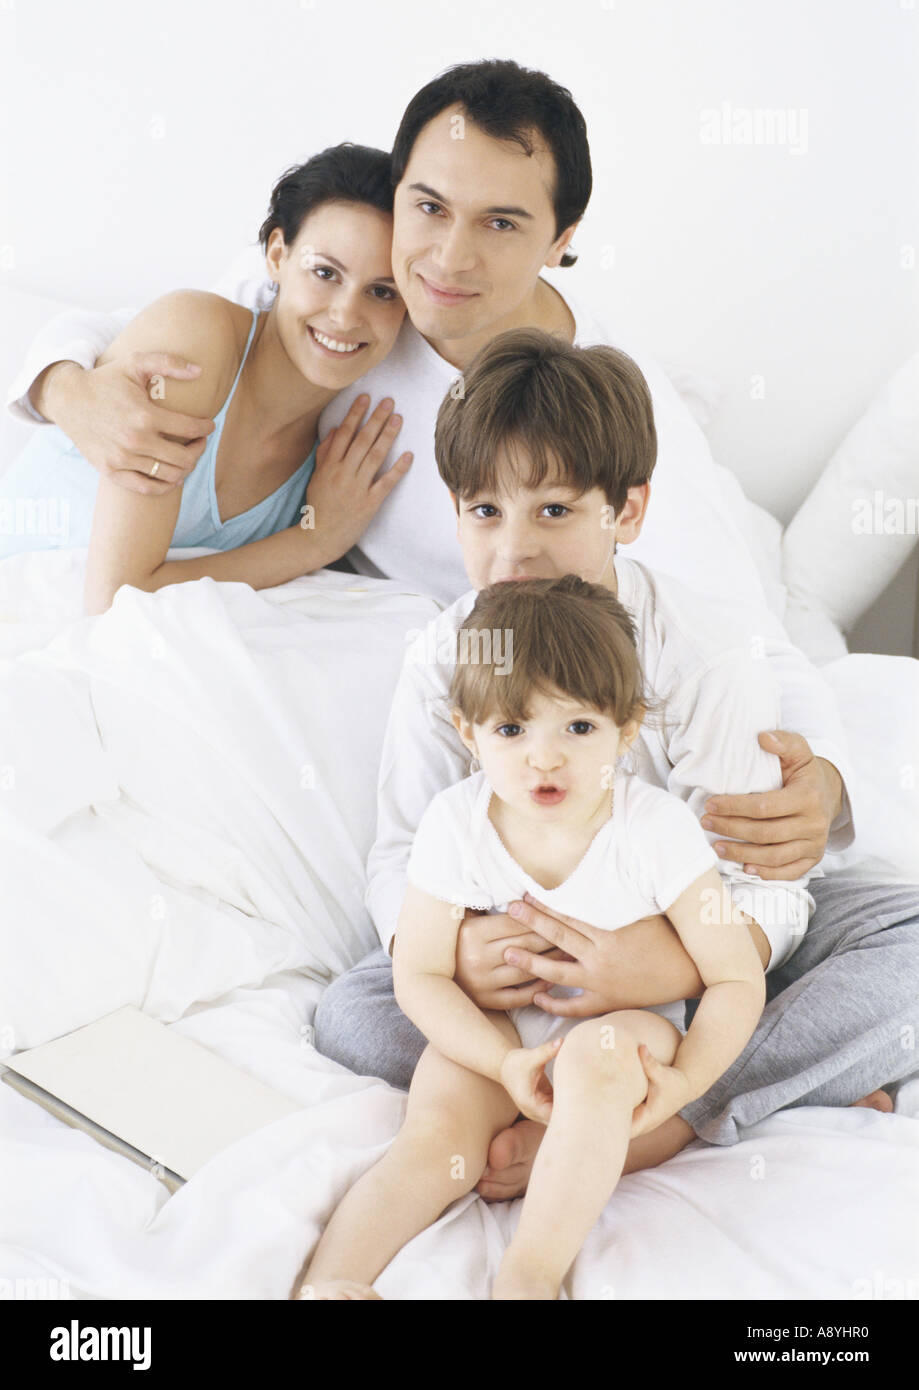 Family in bed together Stock Photo